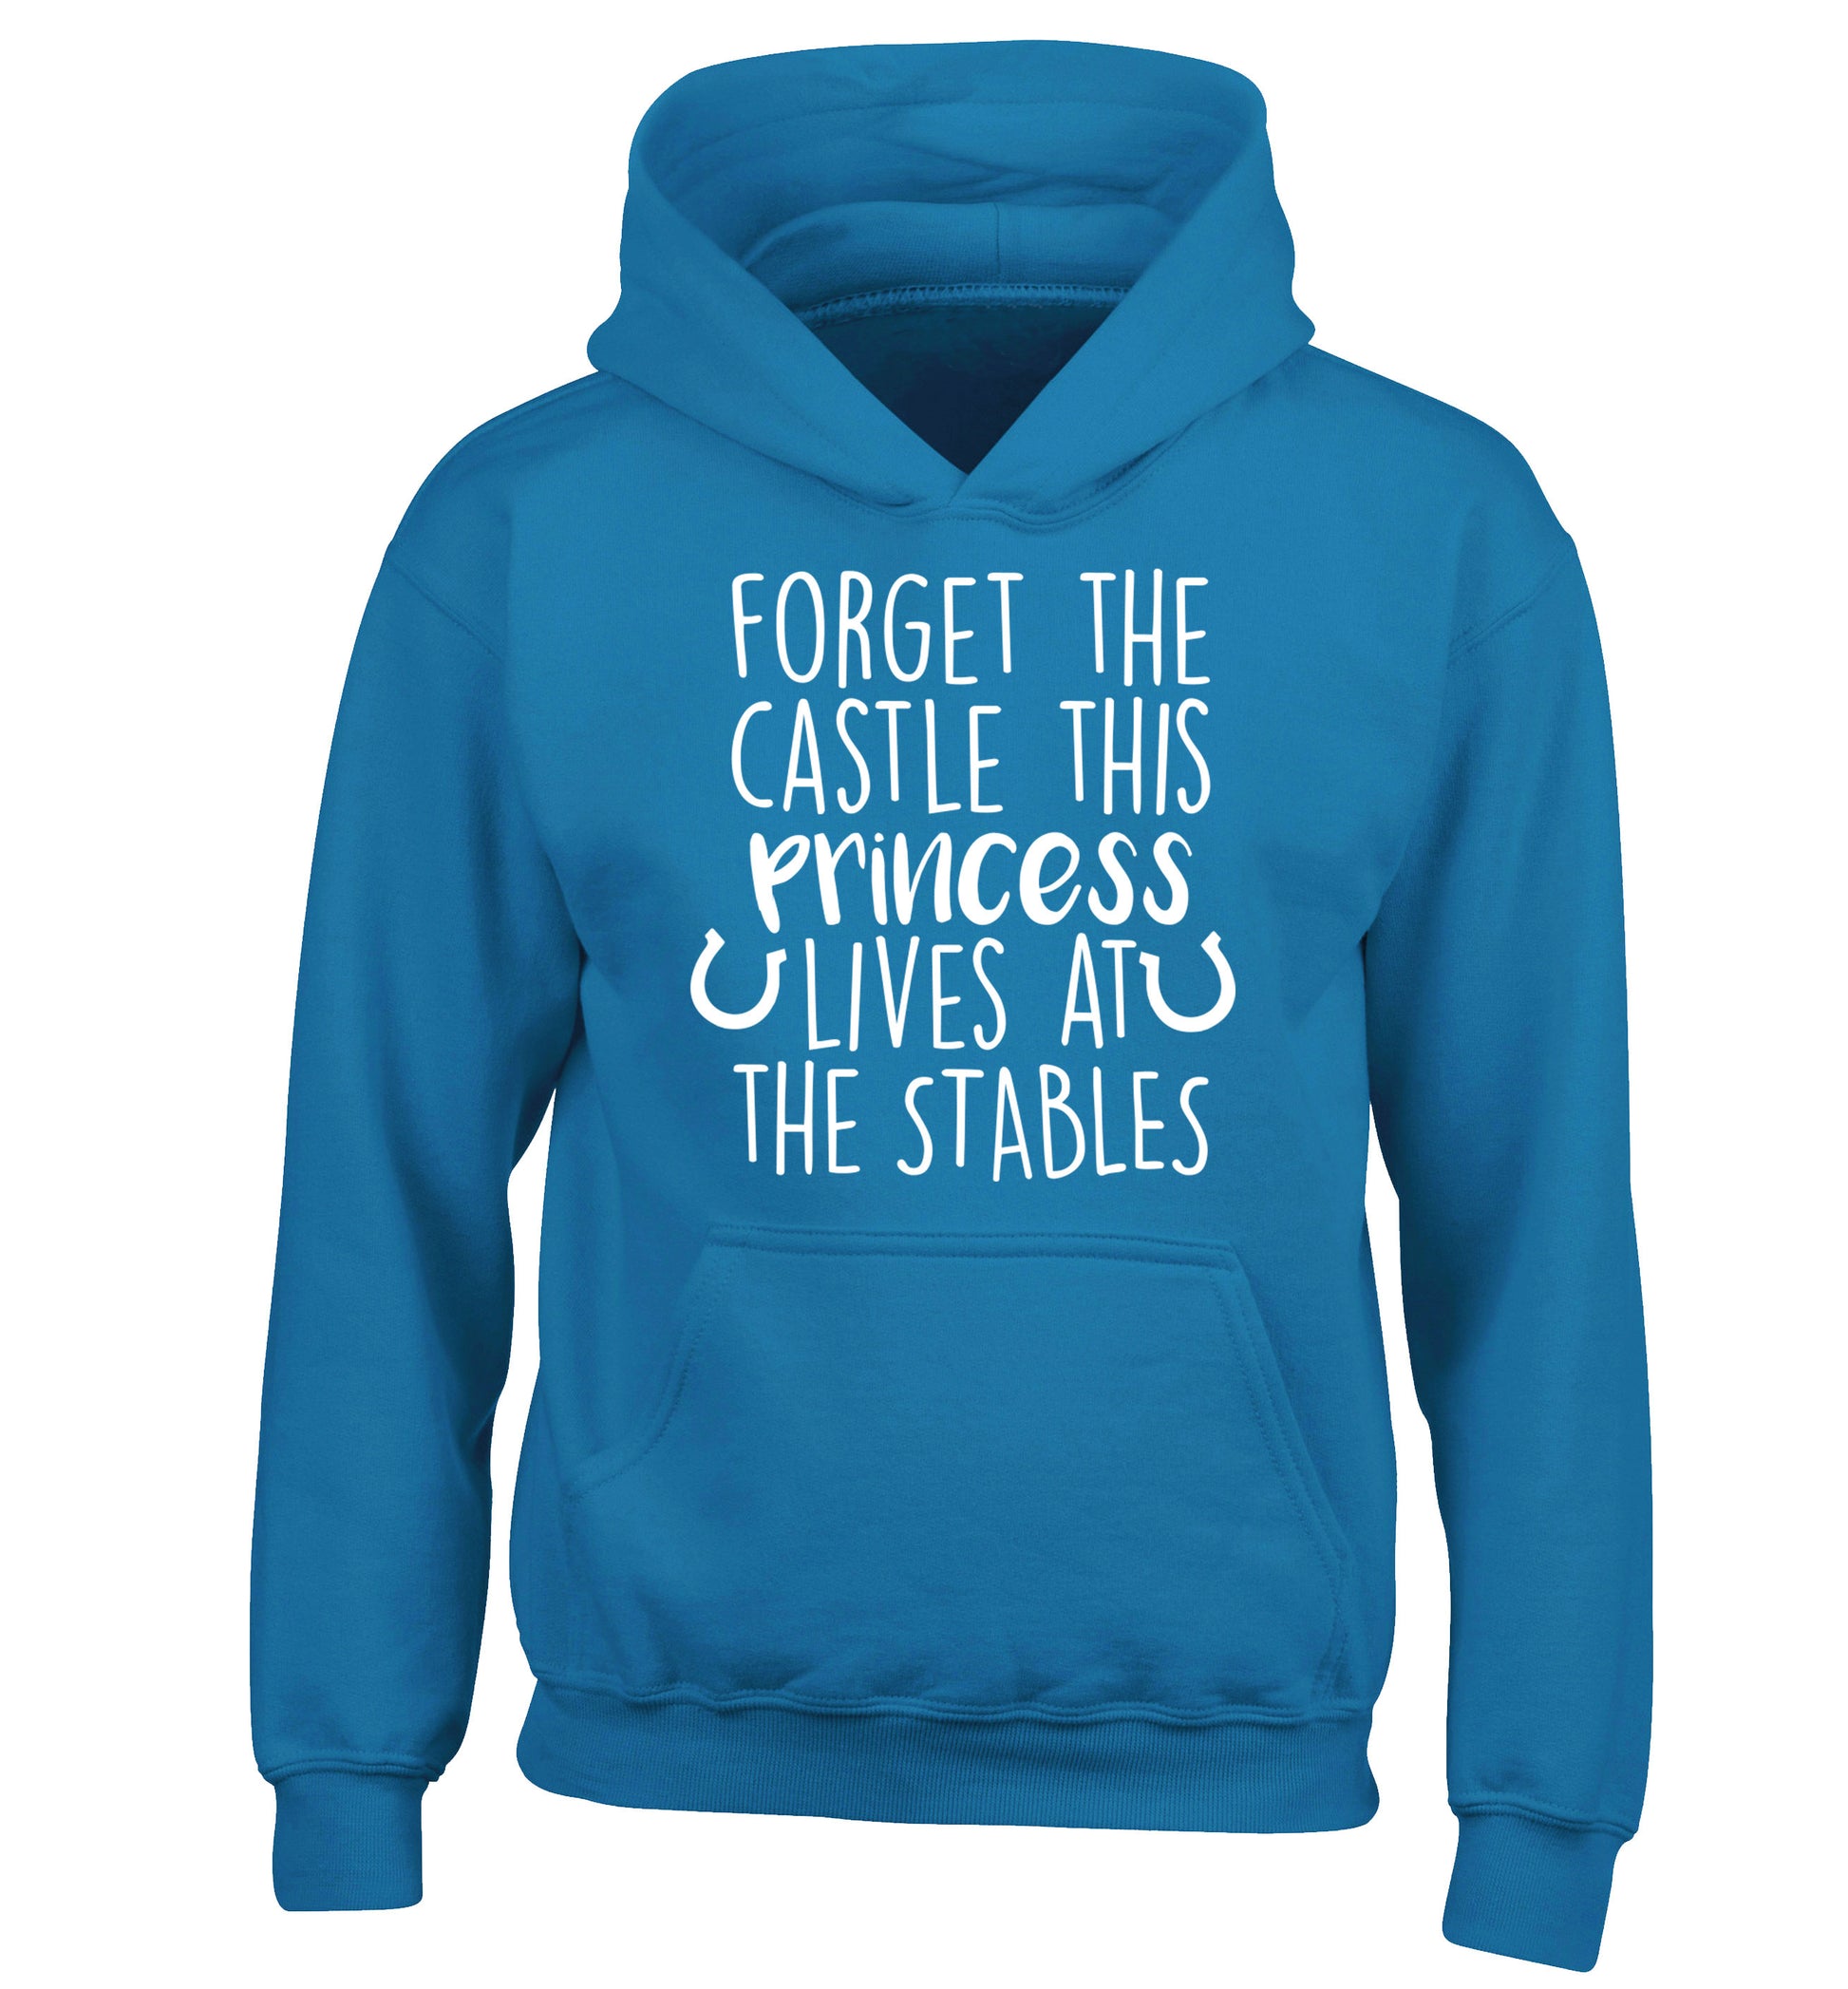 Forget the castle this princess lives at the stables children's blue hoodie 12-14 Years